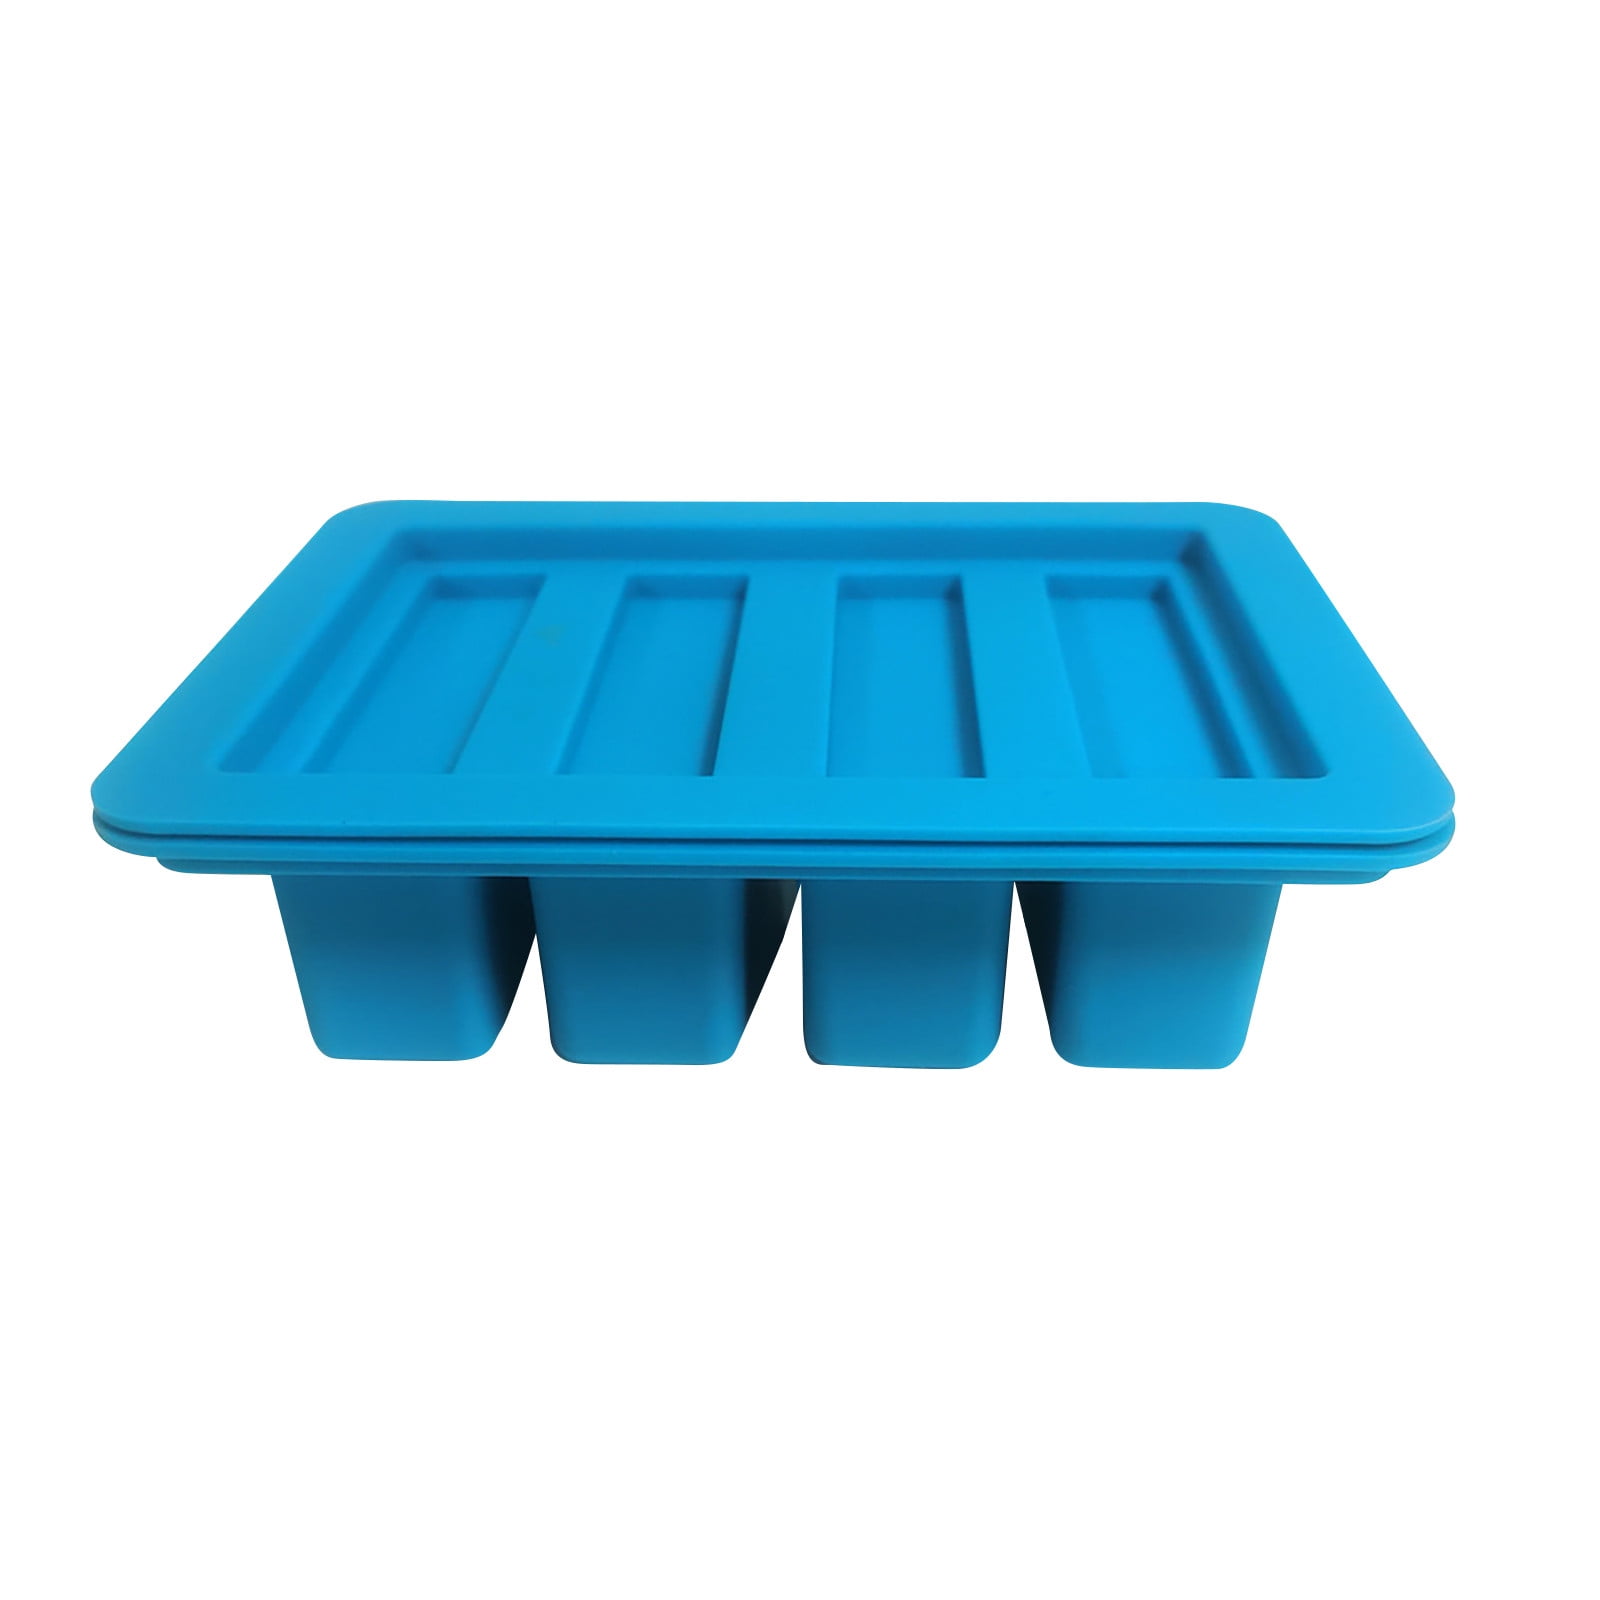 Vikakiooze Promotion on Sale! Butter Mold Tray with Lid Storage The Silicone  Butter Molds with 4 Large Storage 